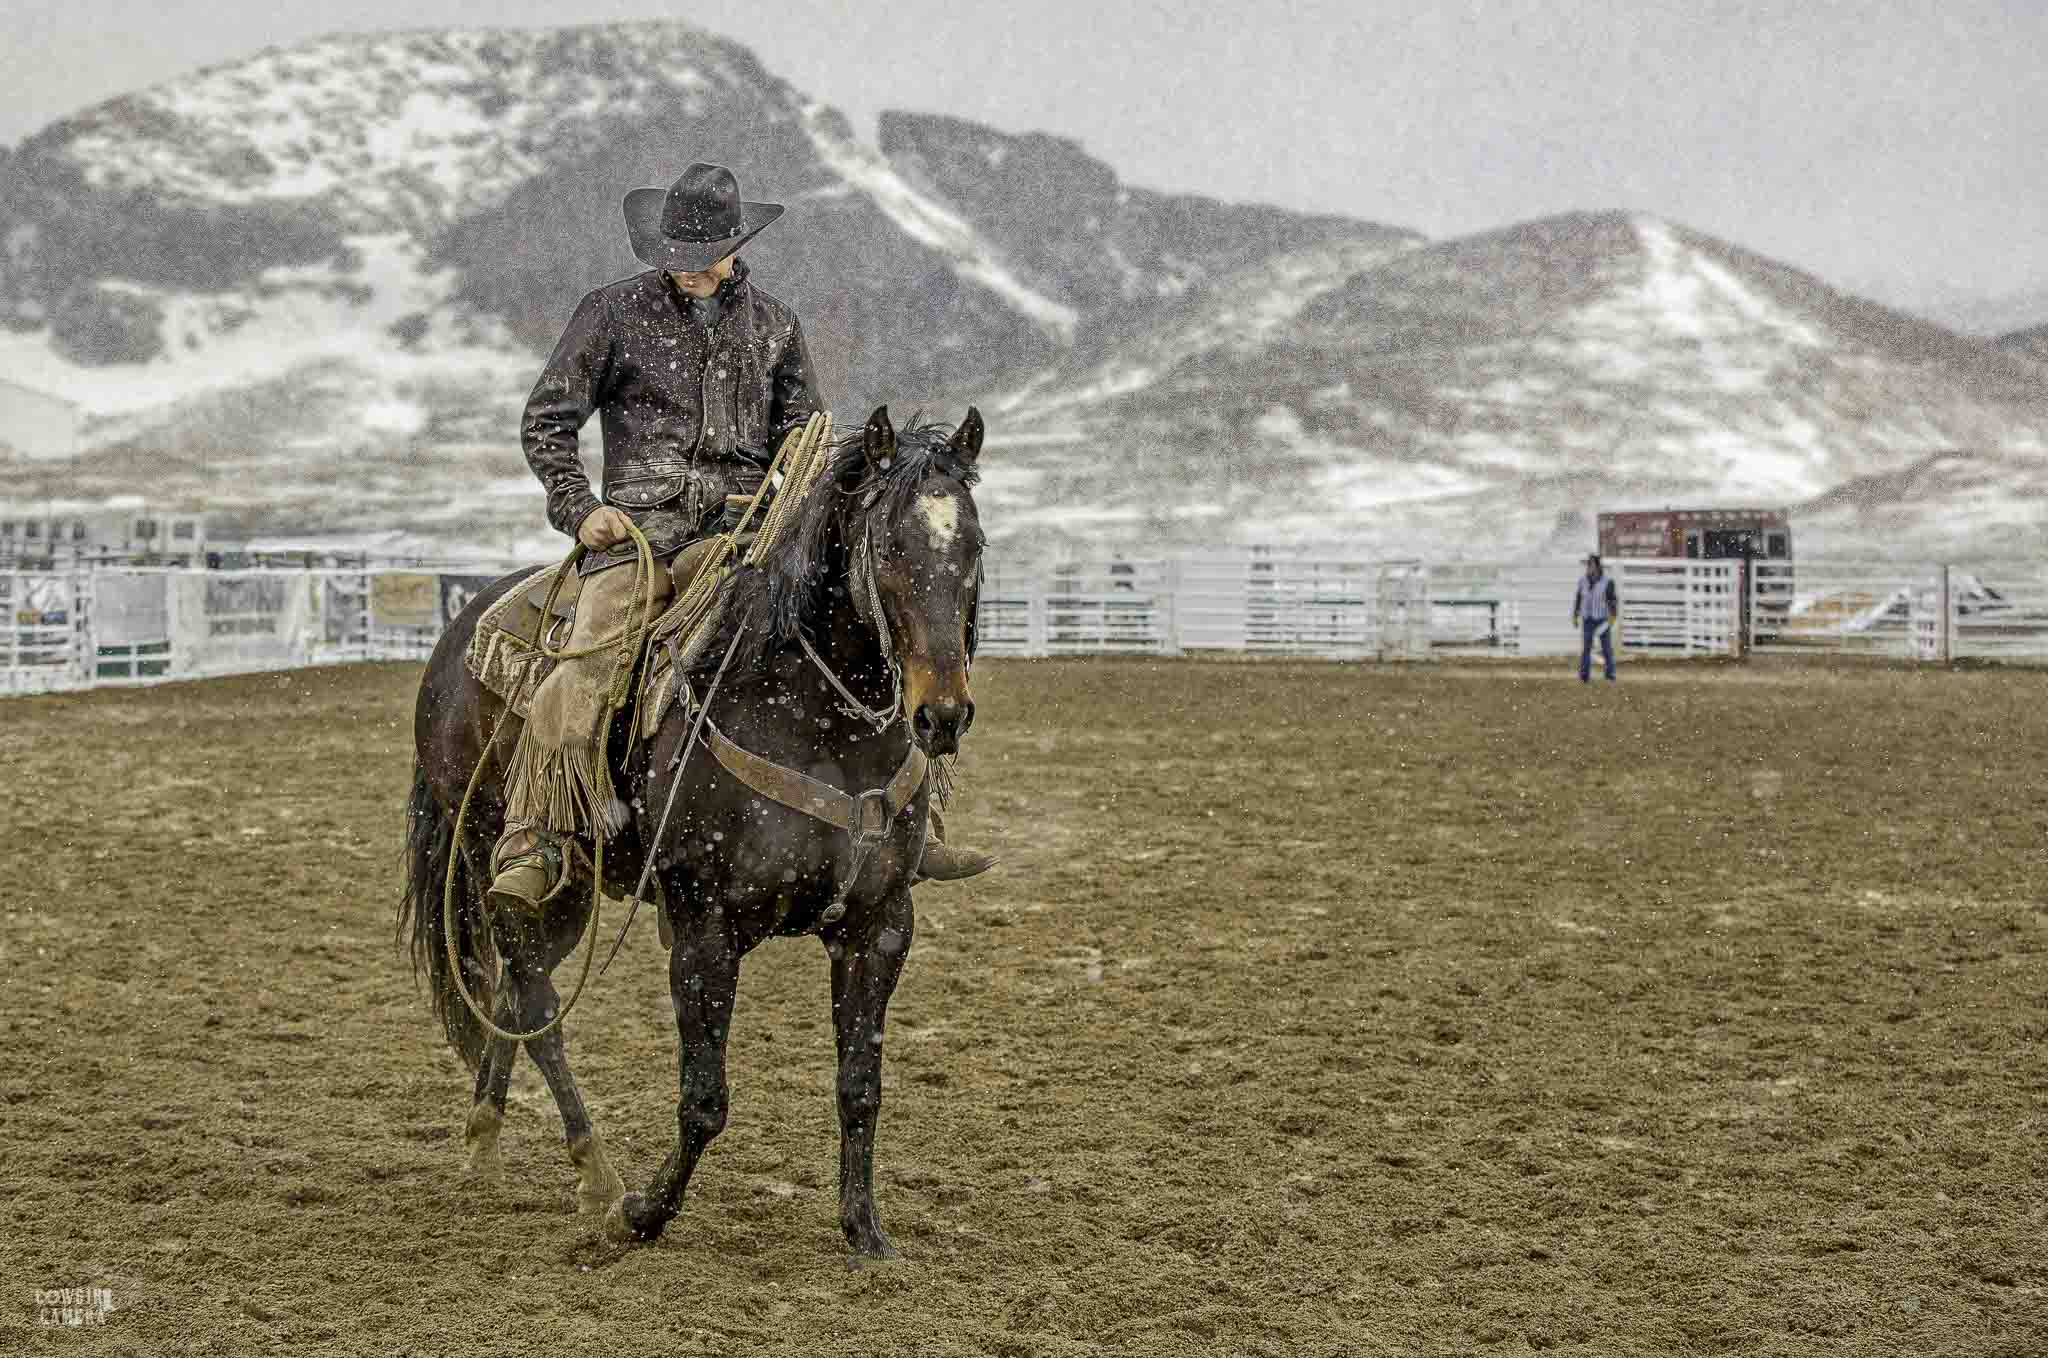 Pickup Man riding in a snowy arena